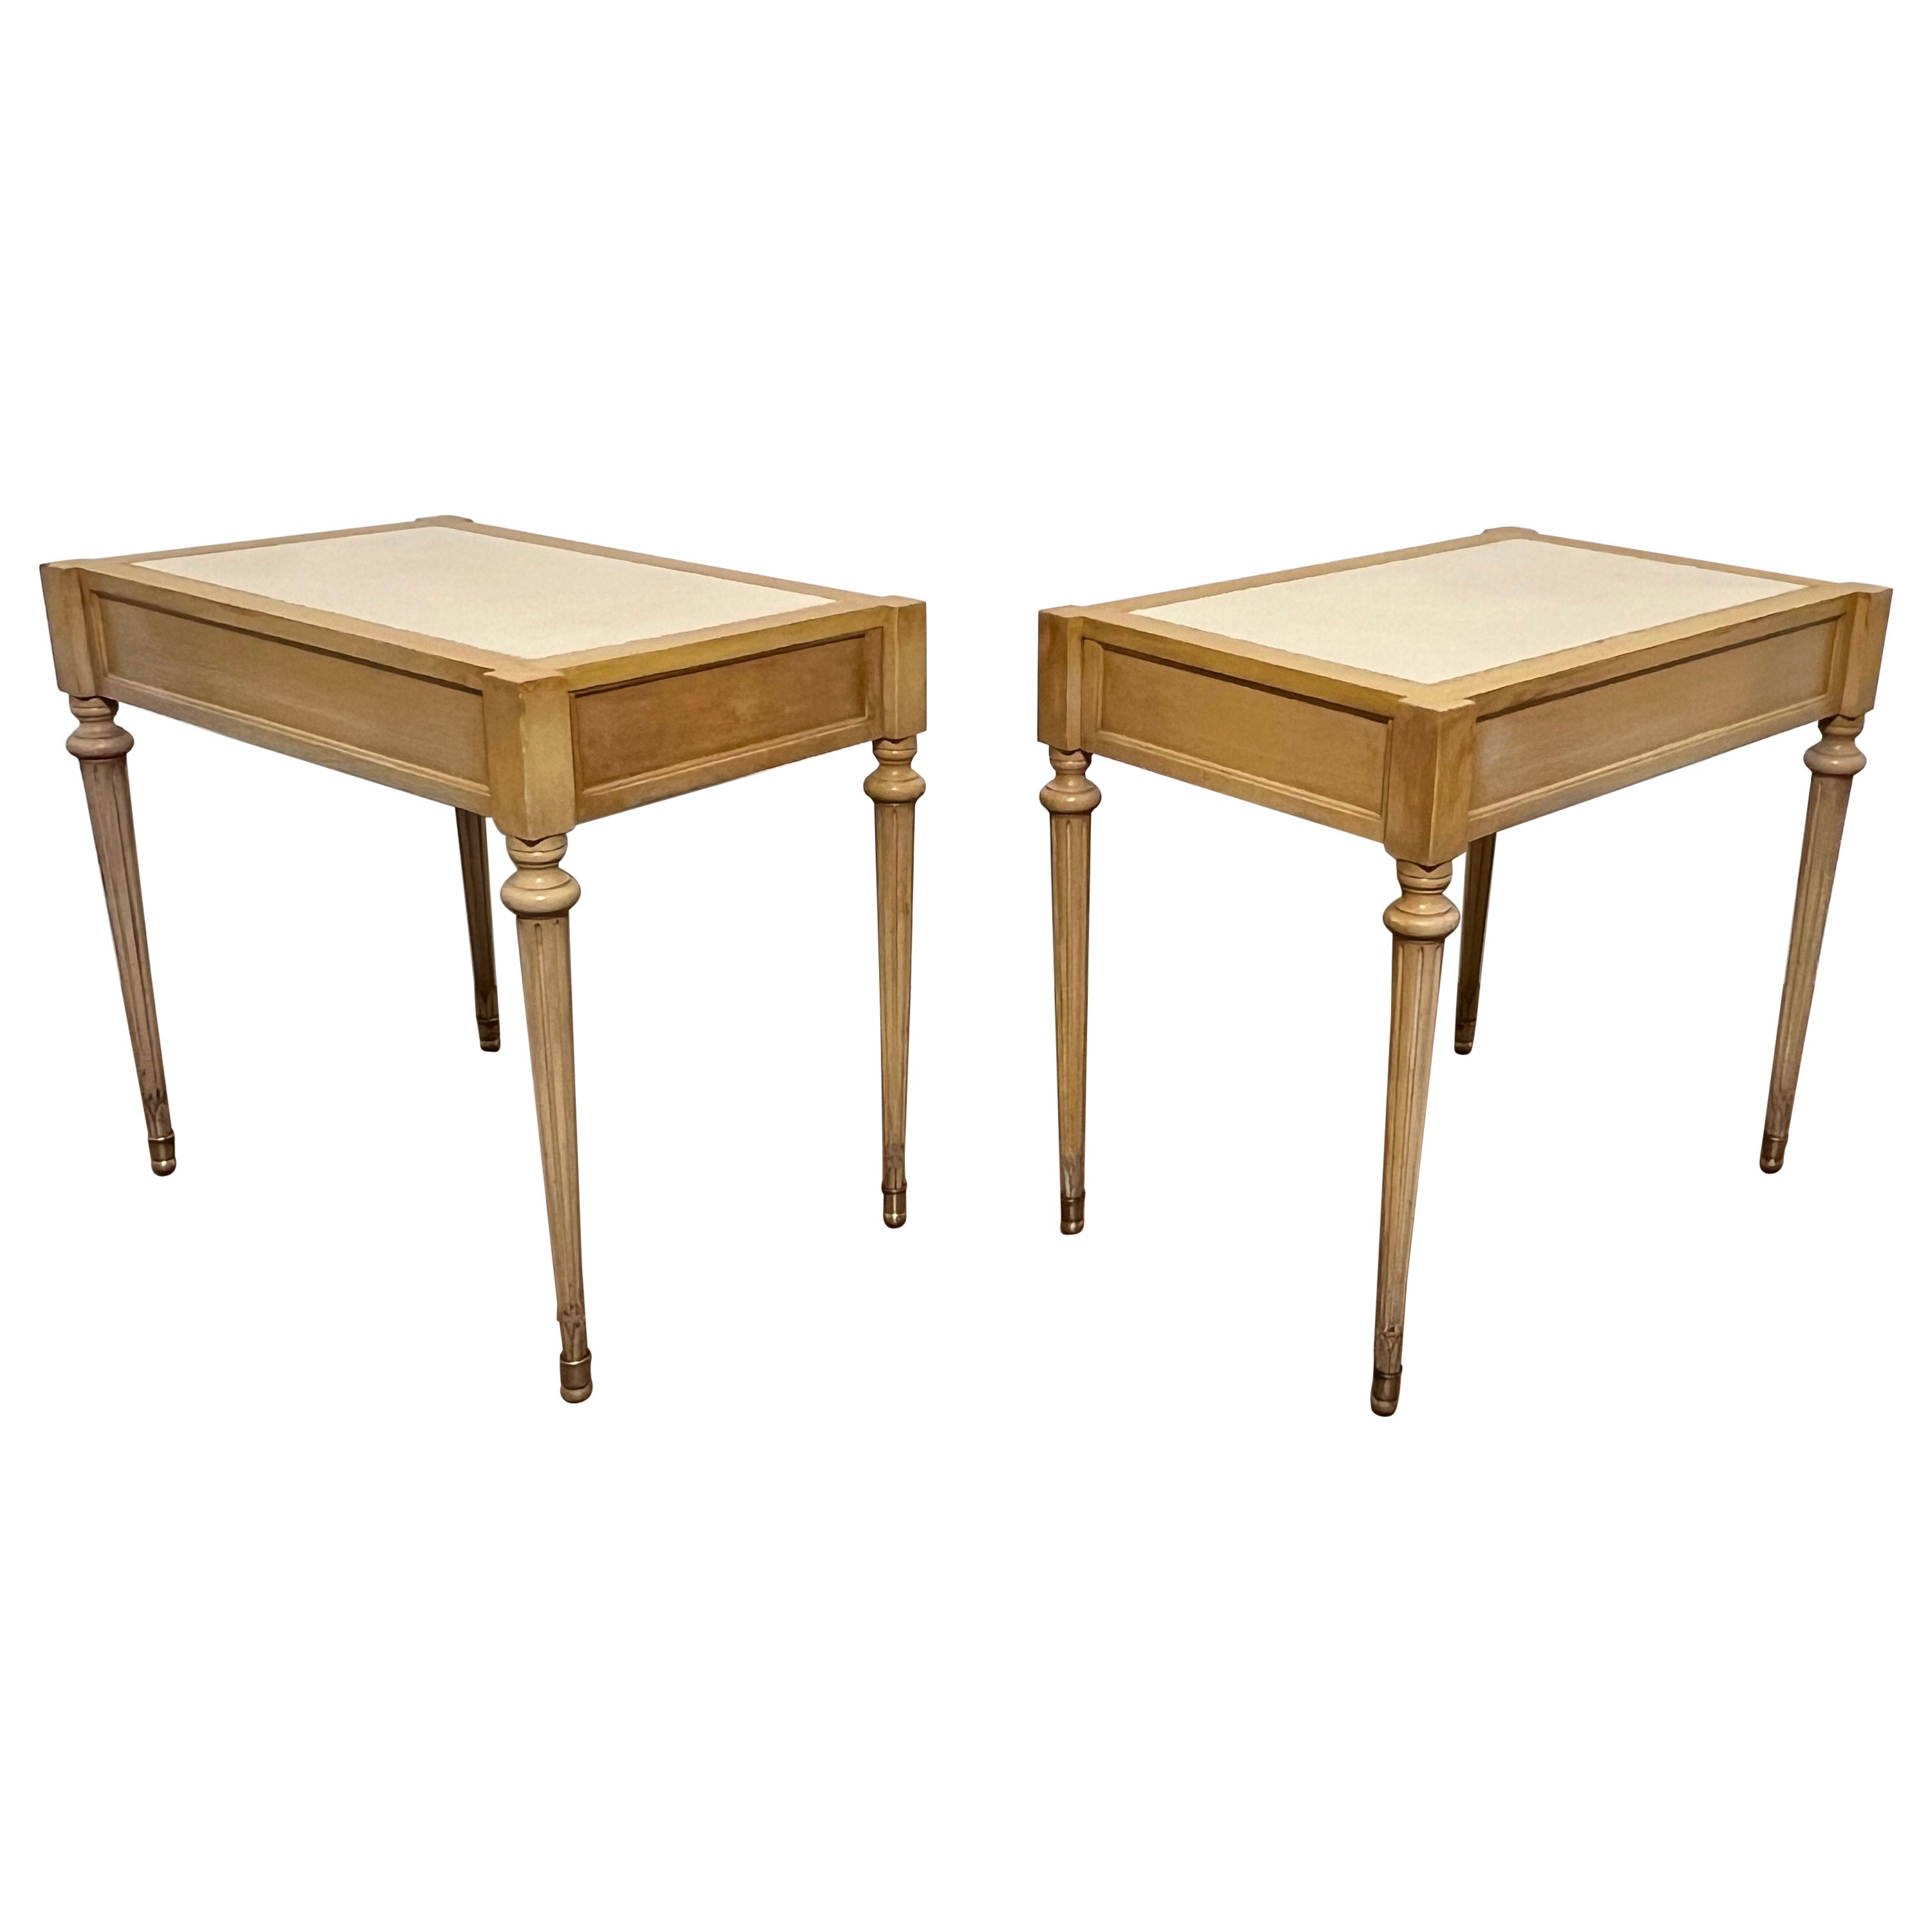 Pair of Louis XVI Style Side Tables With Leather Tops by F & G Furniture, 1950s For Sale